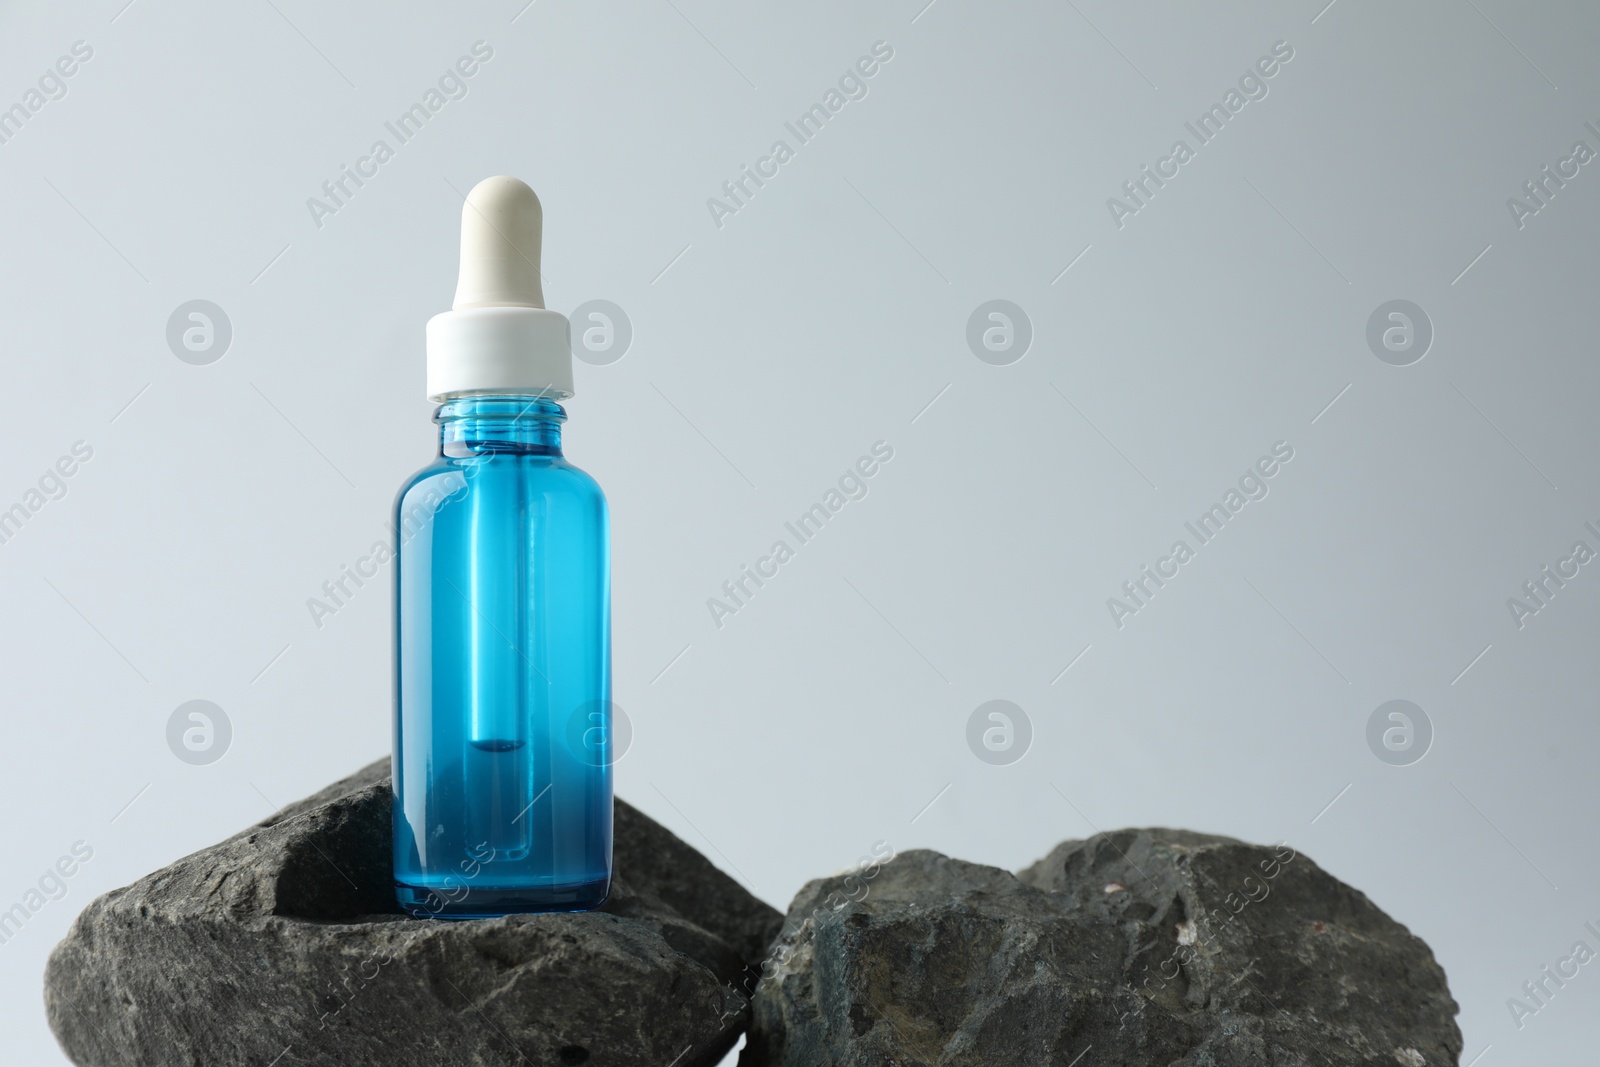 Photo of Bottle of cosmetic serum on stone against light grey background